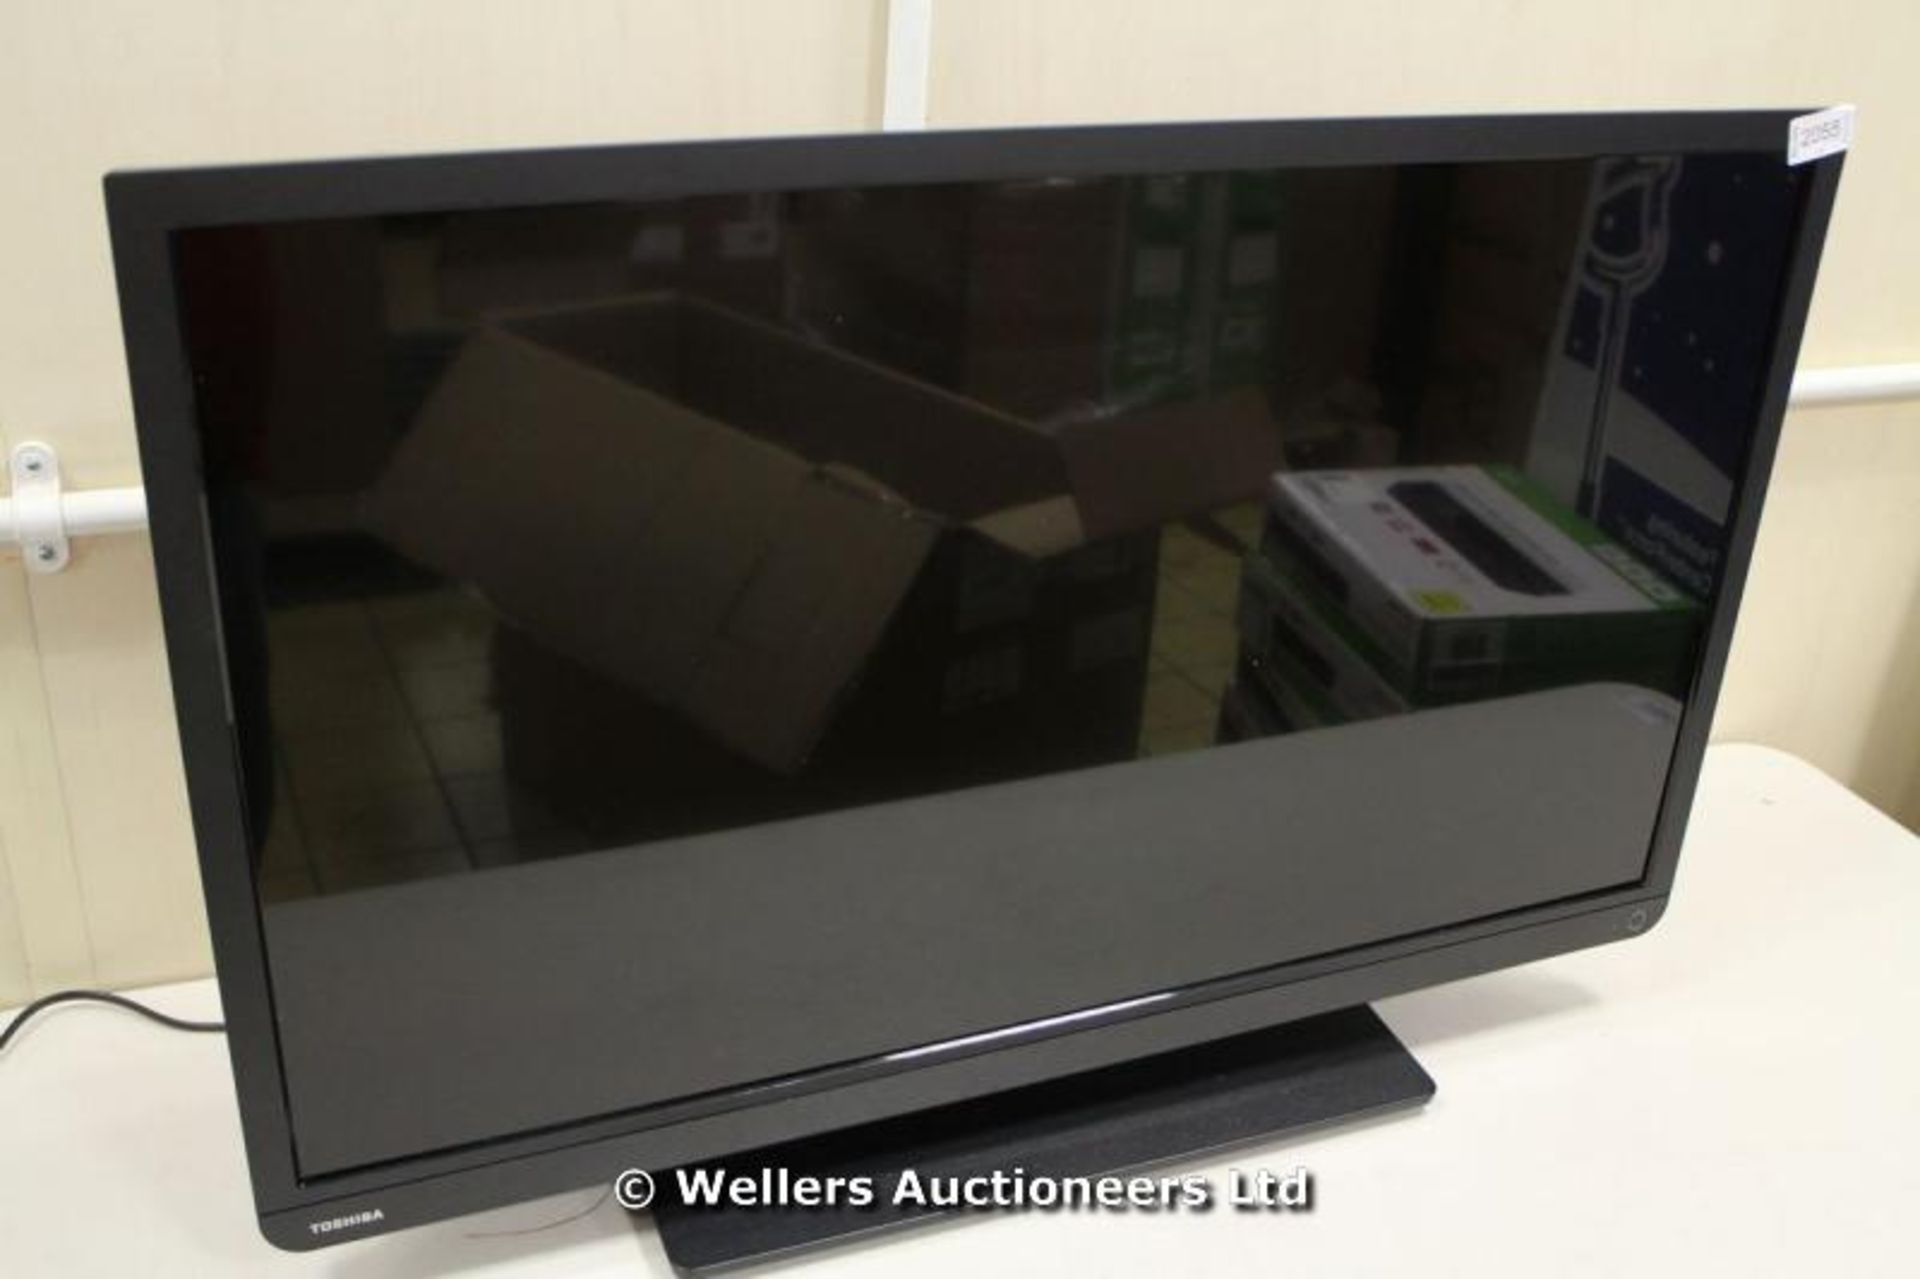 *"TOSHIBA 32W1333DB 32" HD LED TV / UNABLE TO TEST DUE TO NO POWER (3984053) / GRADE: RETAIL RETURNS